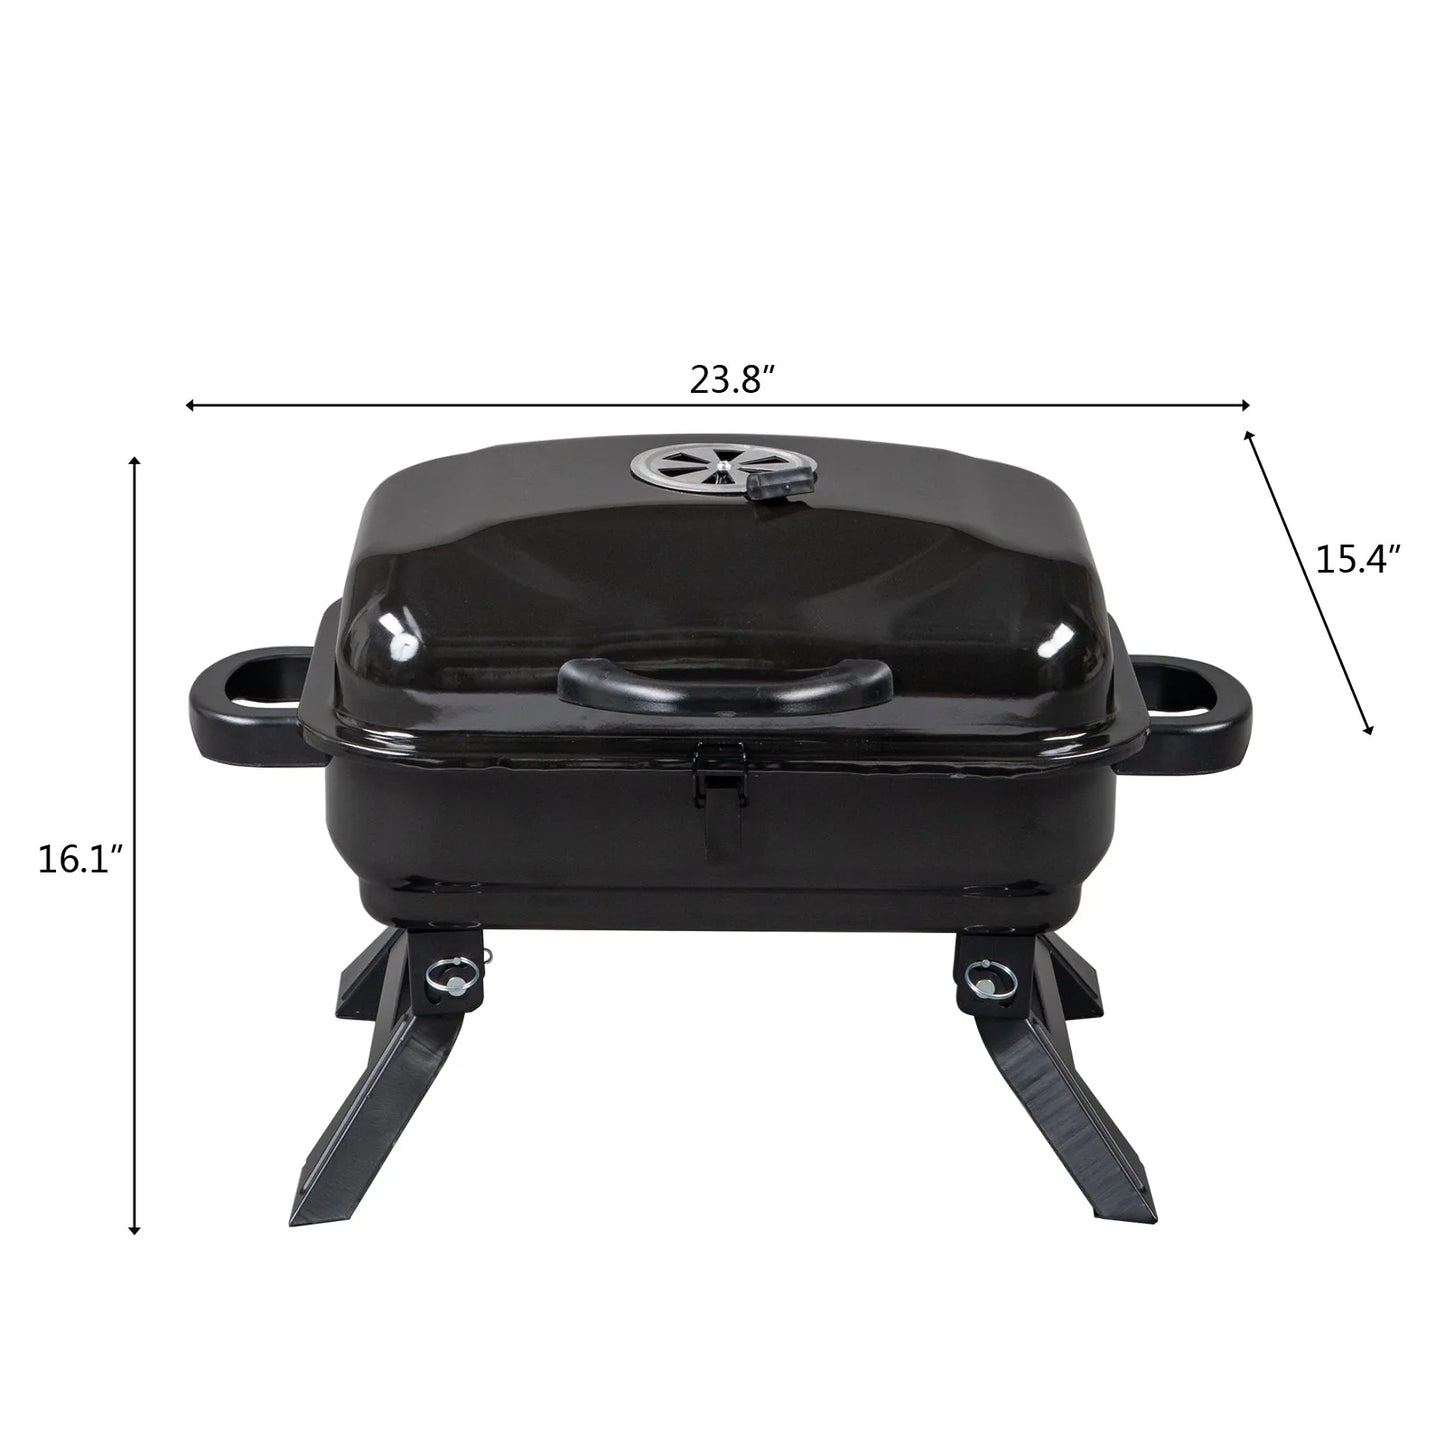 Professional title: ```Compact Tabletop Charcoal Grill for On-the-Go Grilling```